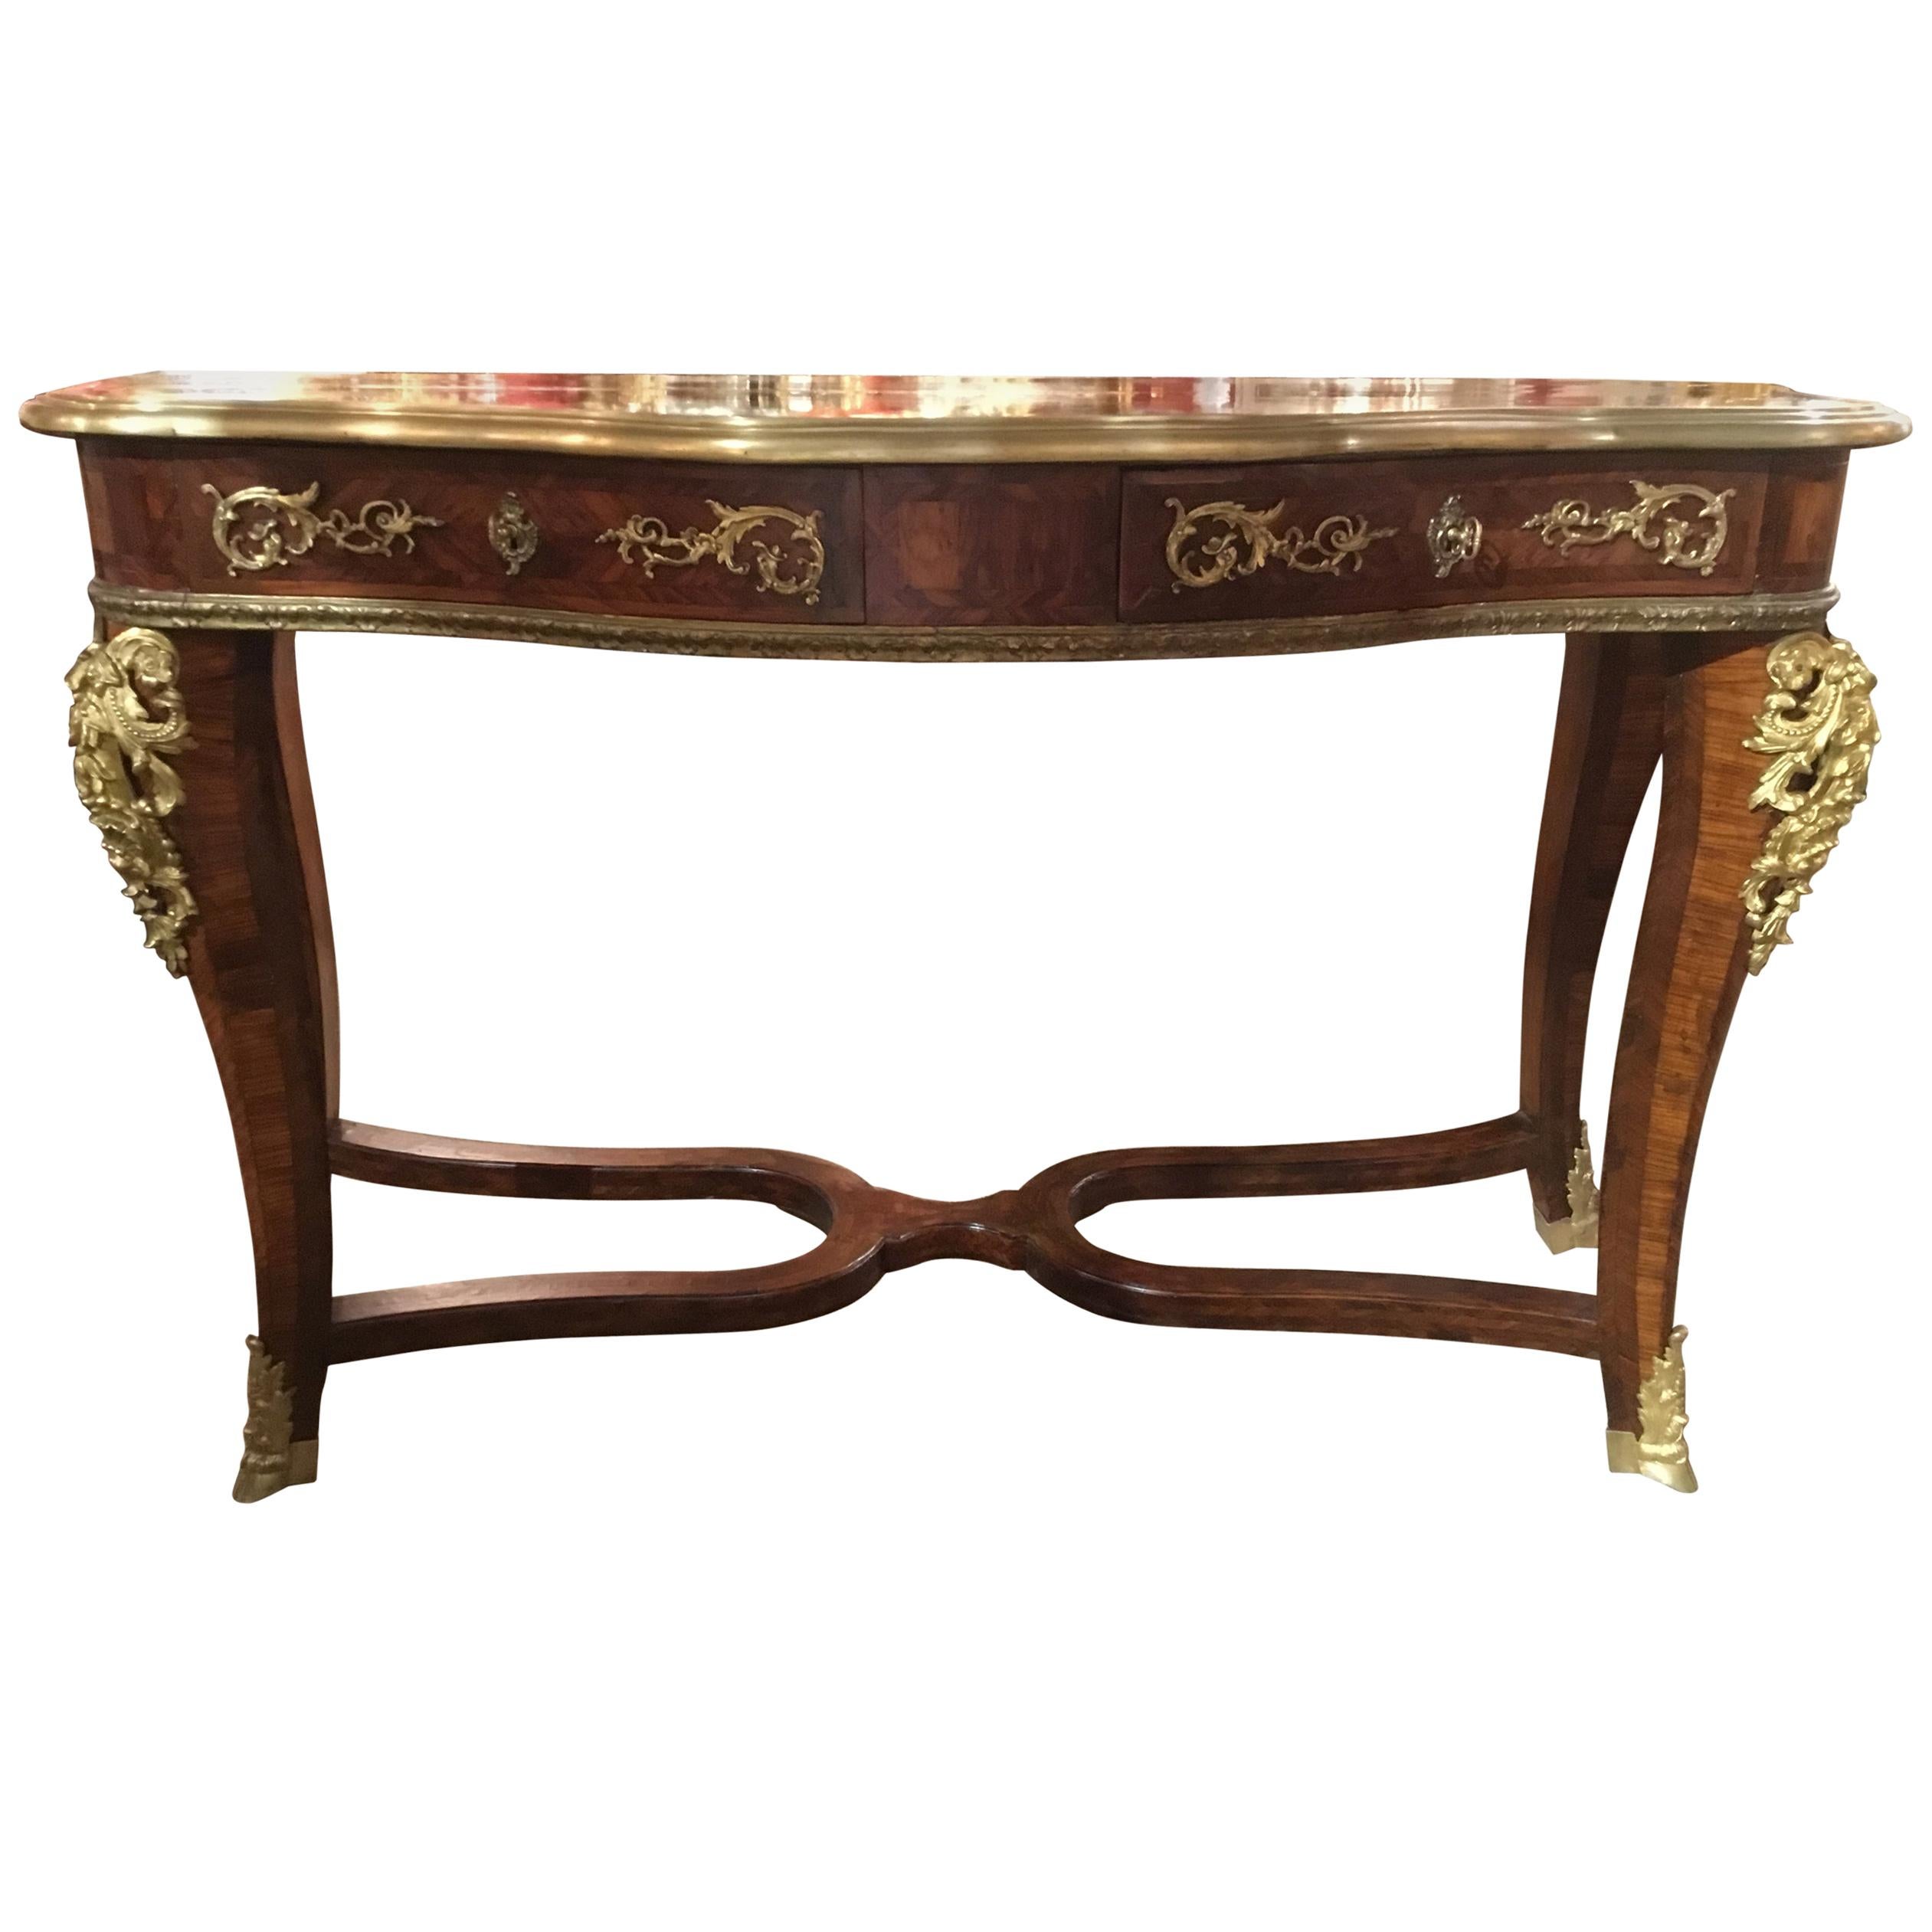 Regence Gilt Bronze Mounted Parquetry Inlaid Hardwood Console Table 18th Century For Sale